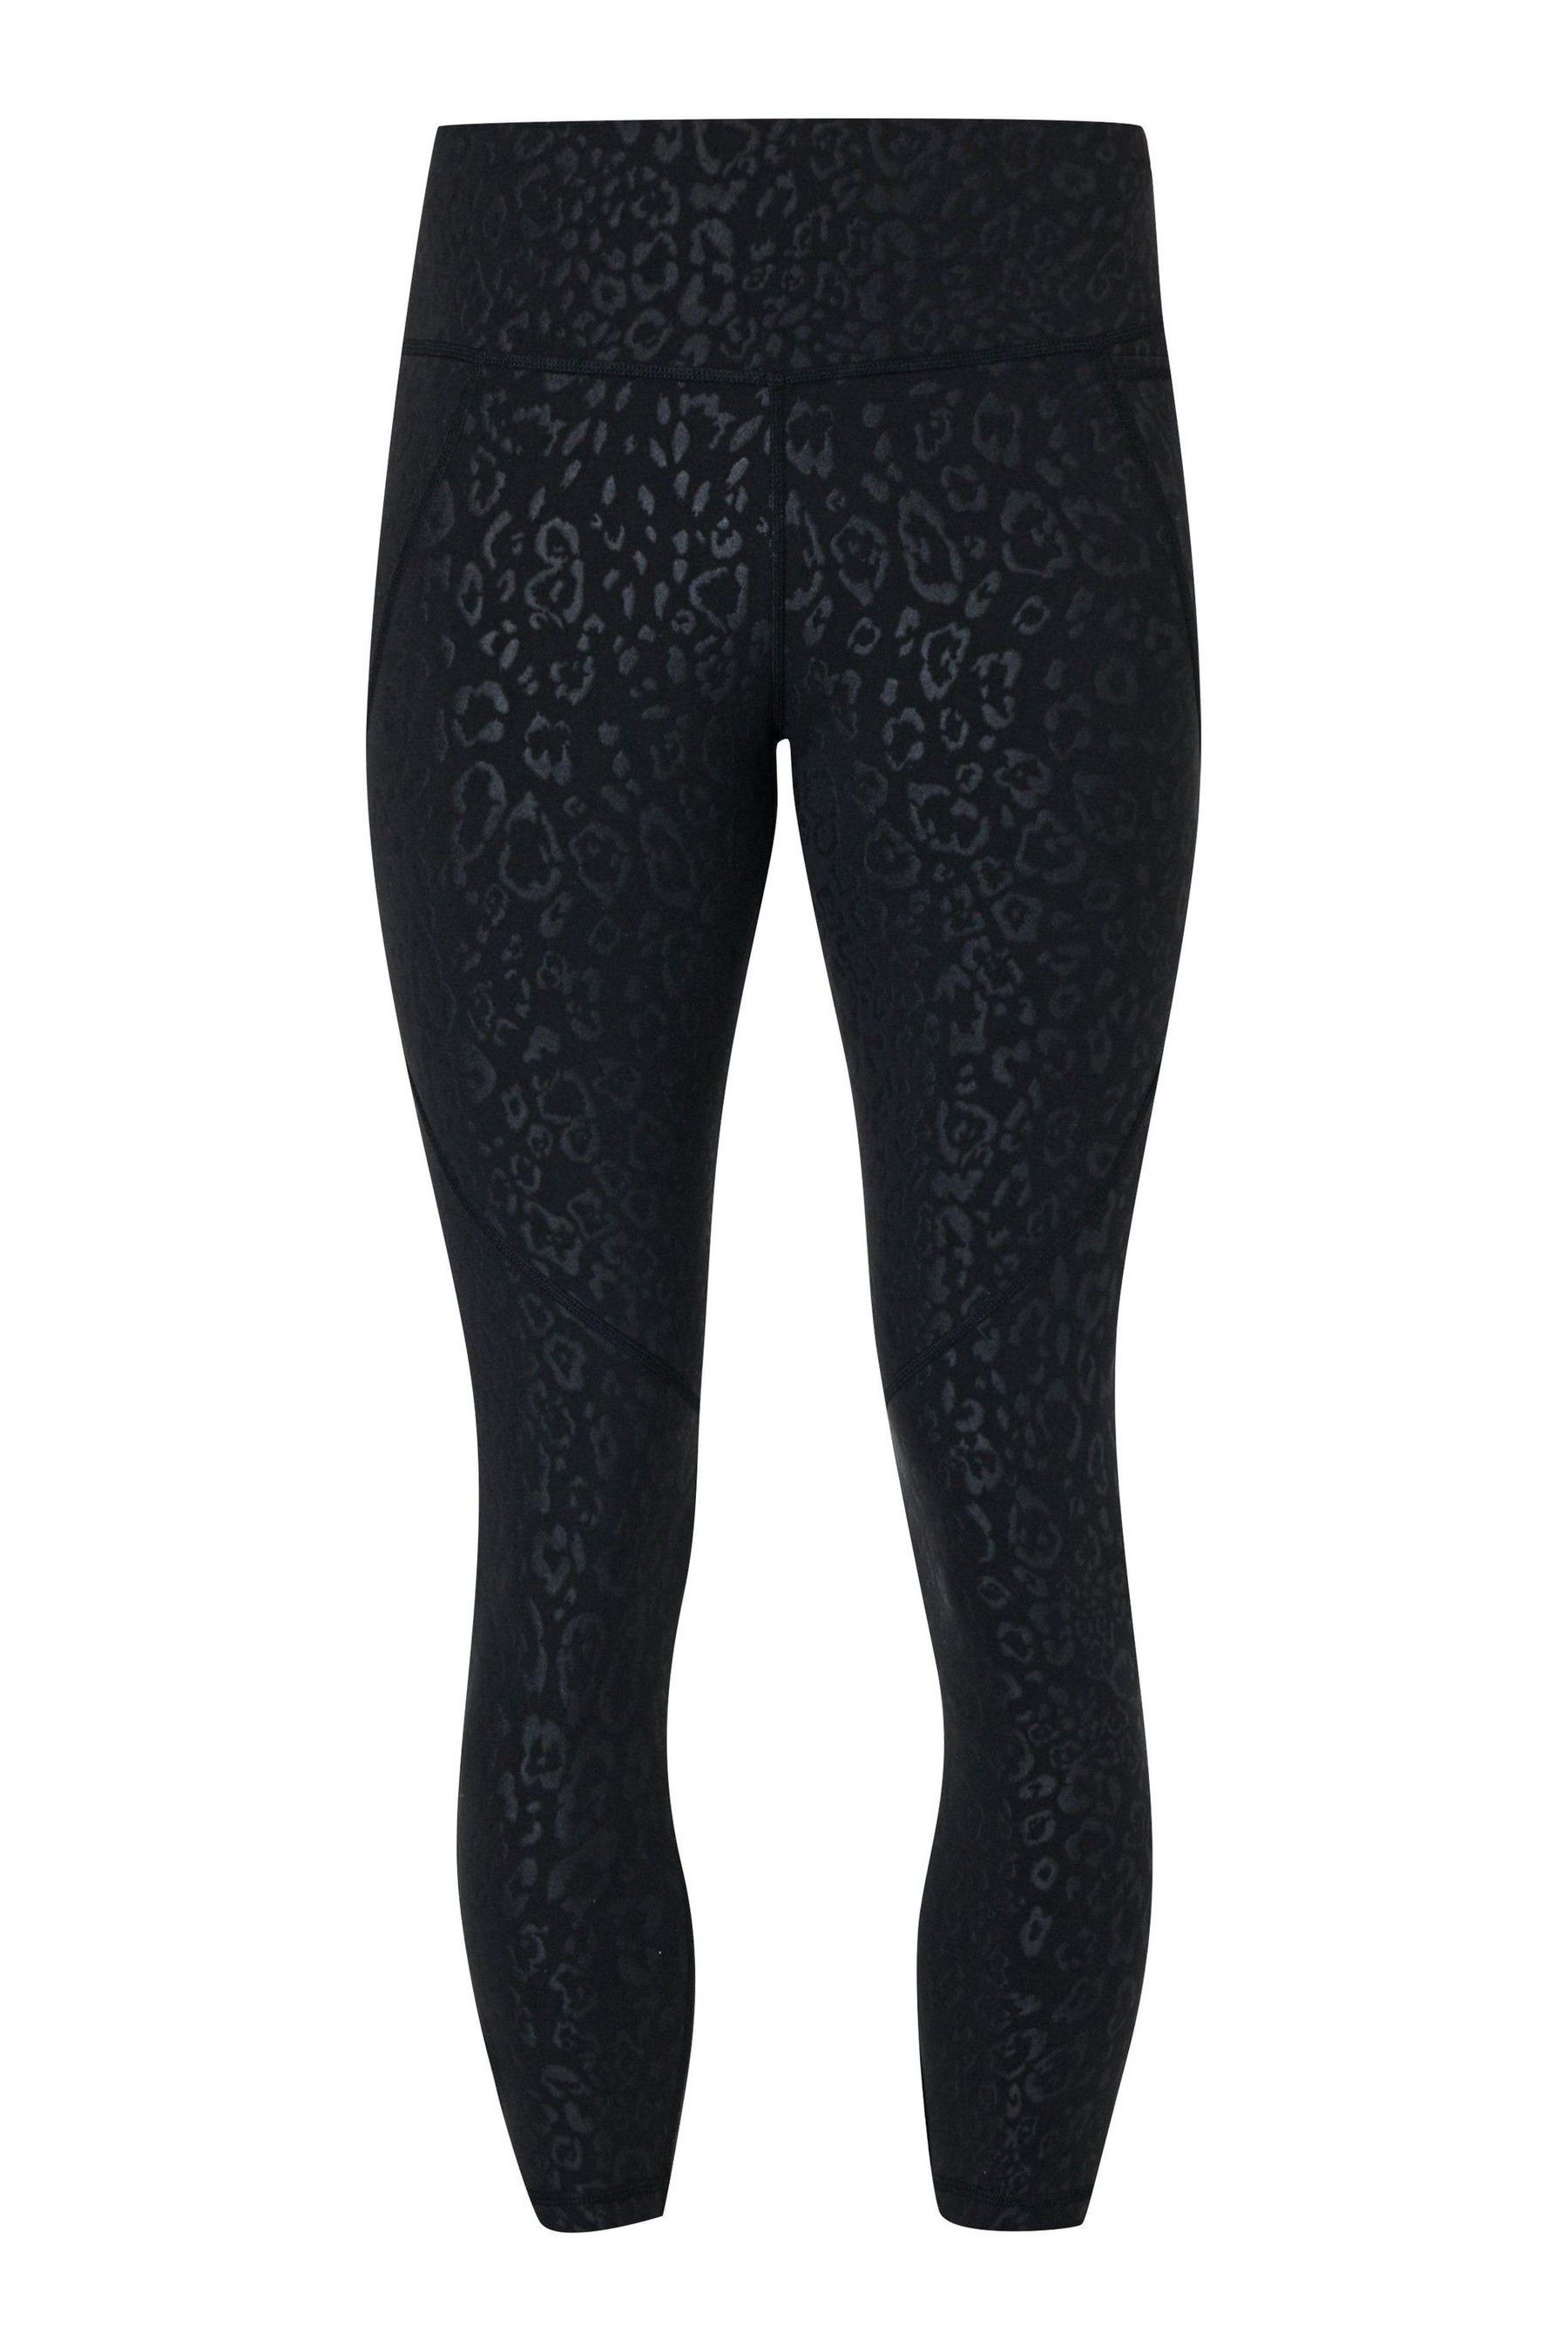 Activewear leggings - Subtle navy blue leopard print and black - Designed  for running, gym and cycling - Quality shape enhancing quick-drying fabric  - LPRD